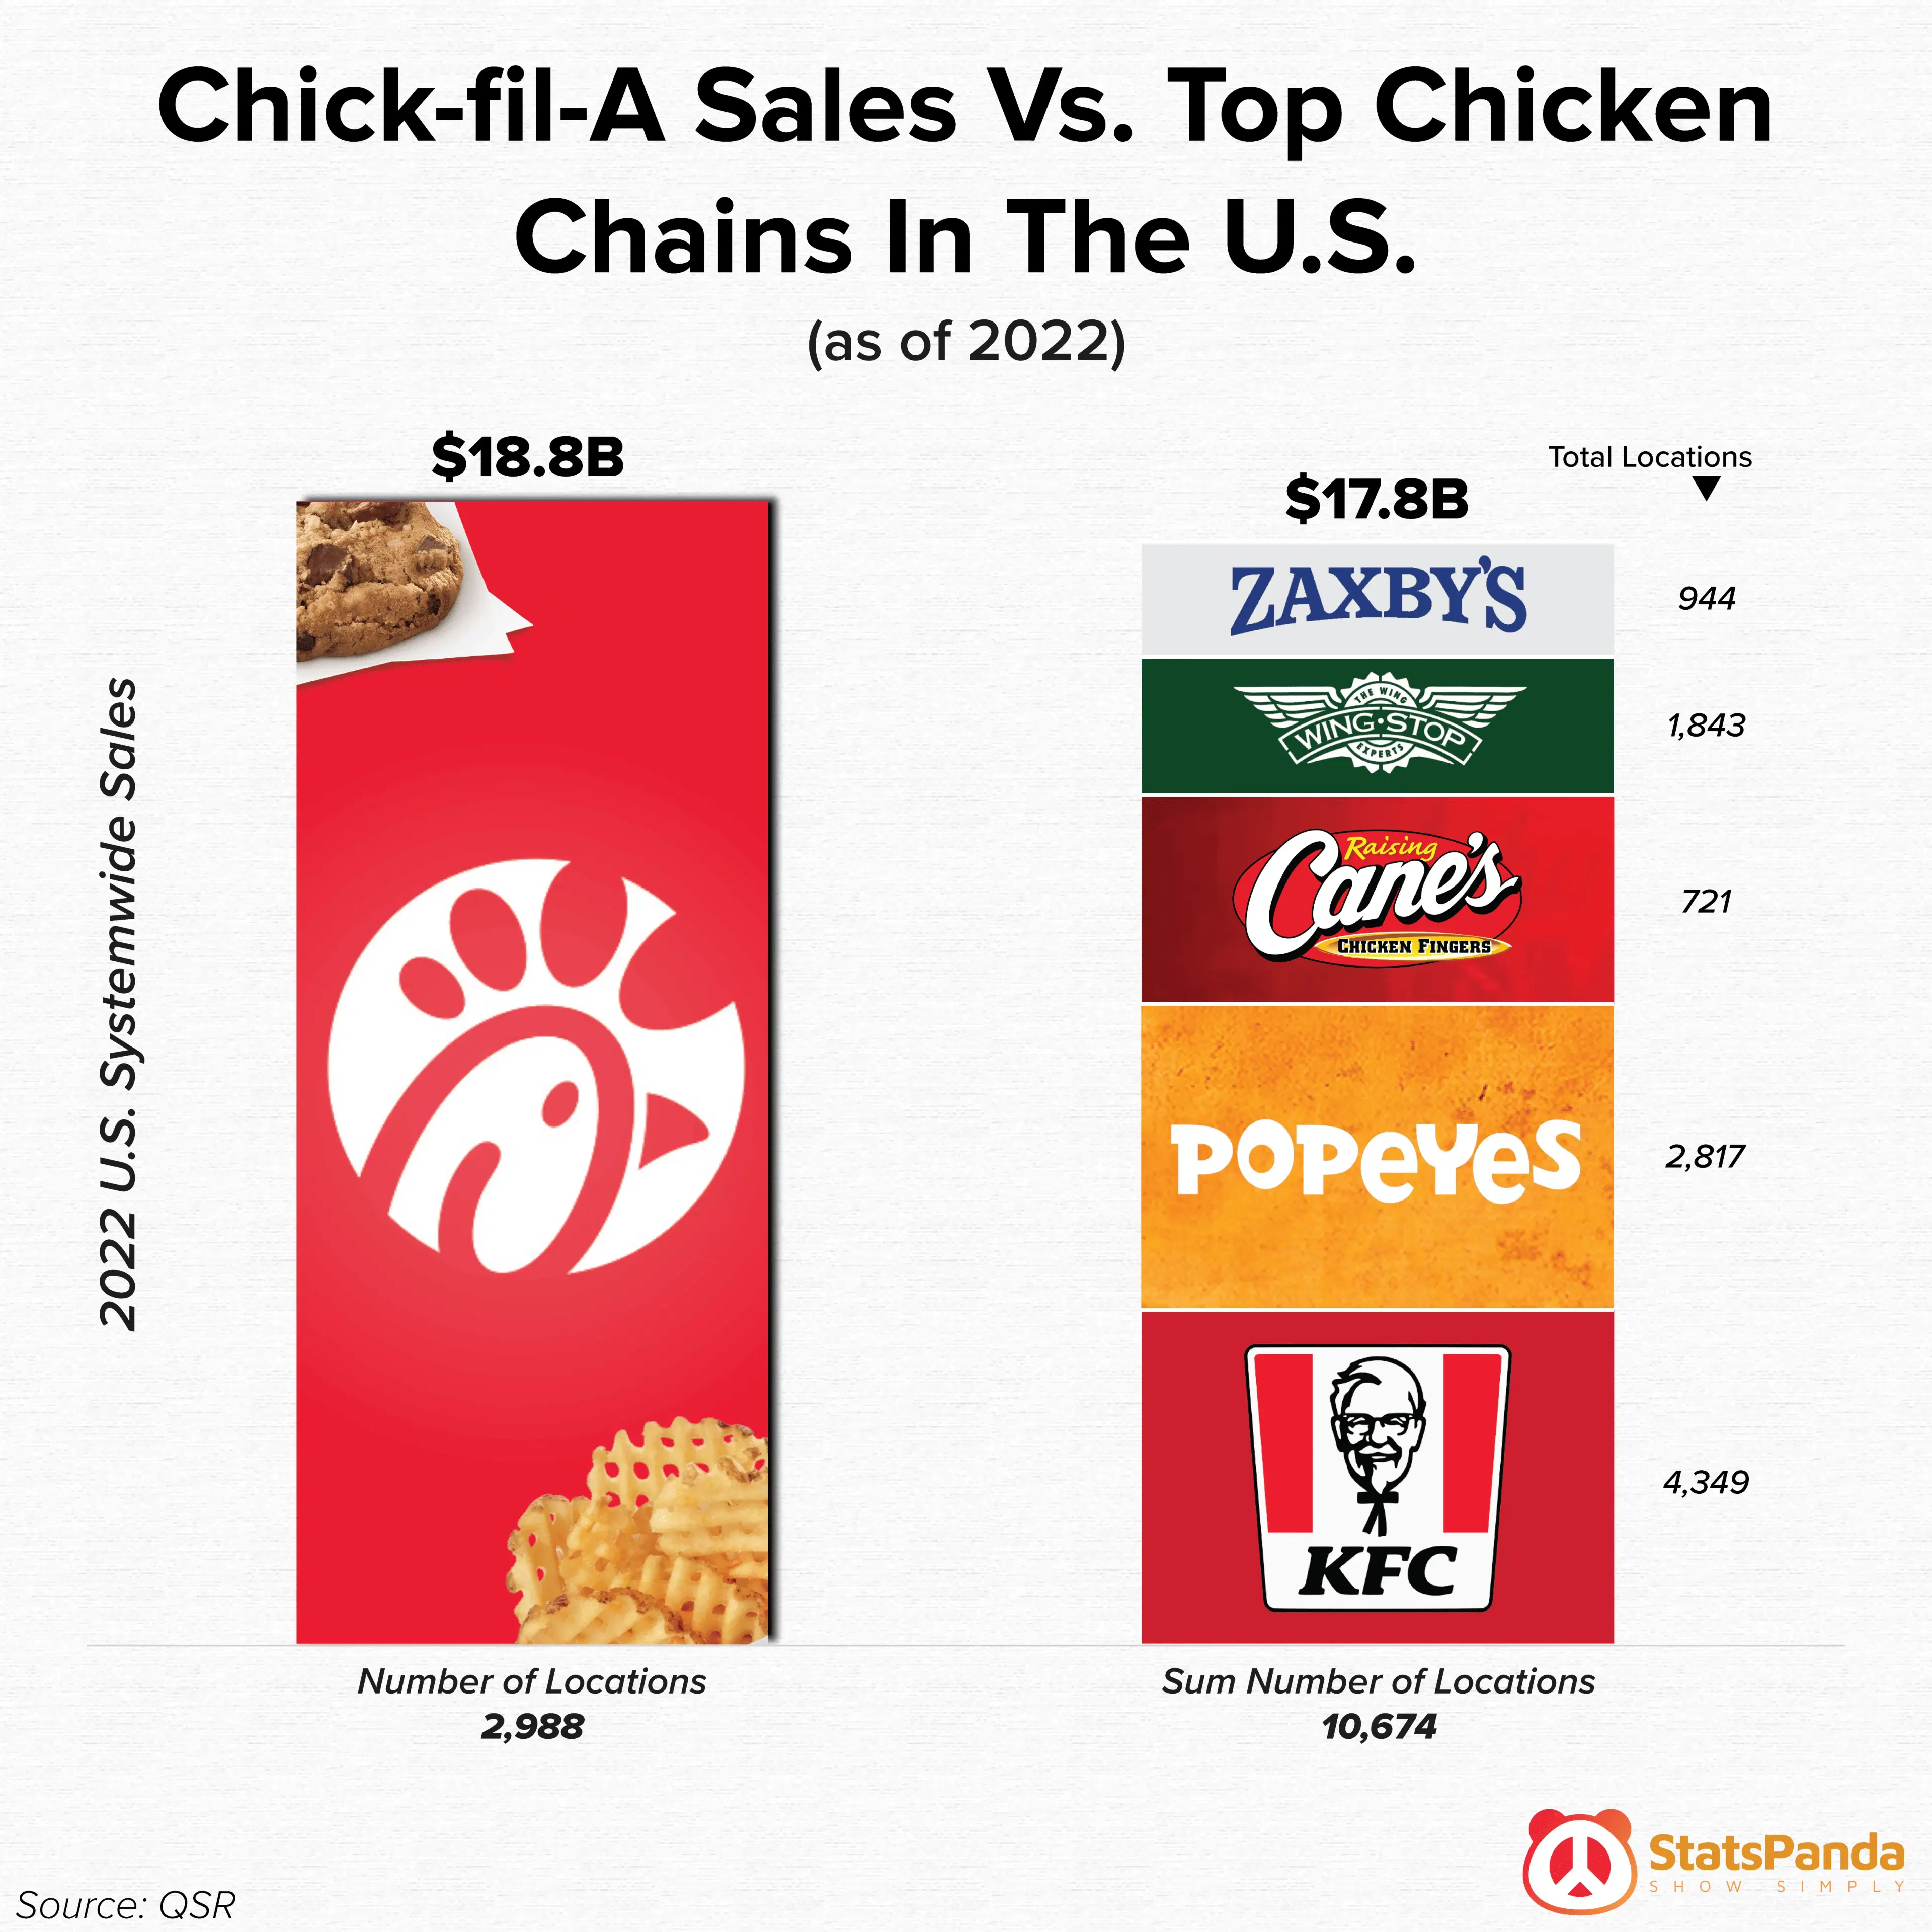 Chick-fil-A Sales Vs. The Top Chicken Chains In The U.S.